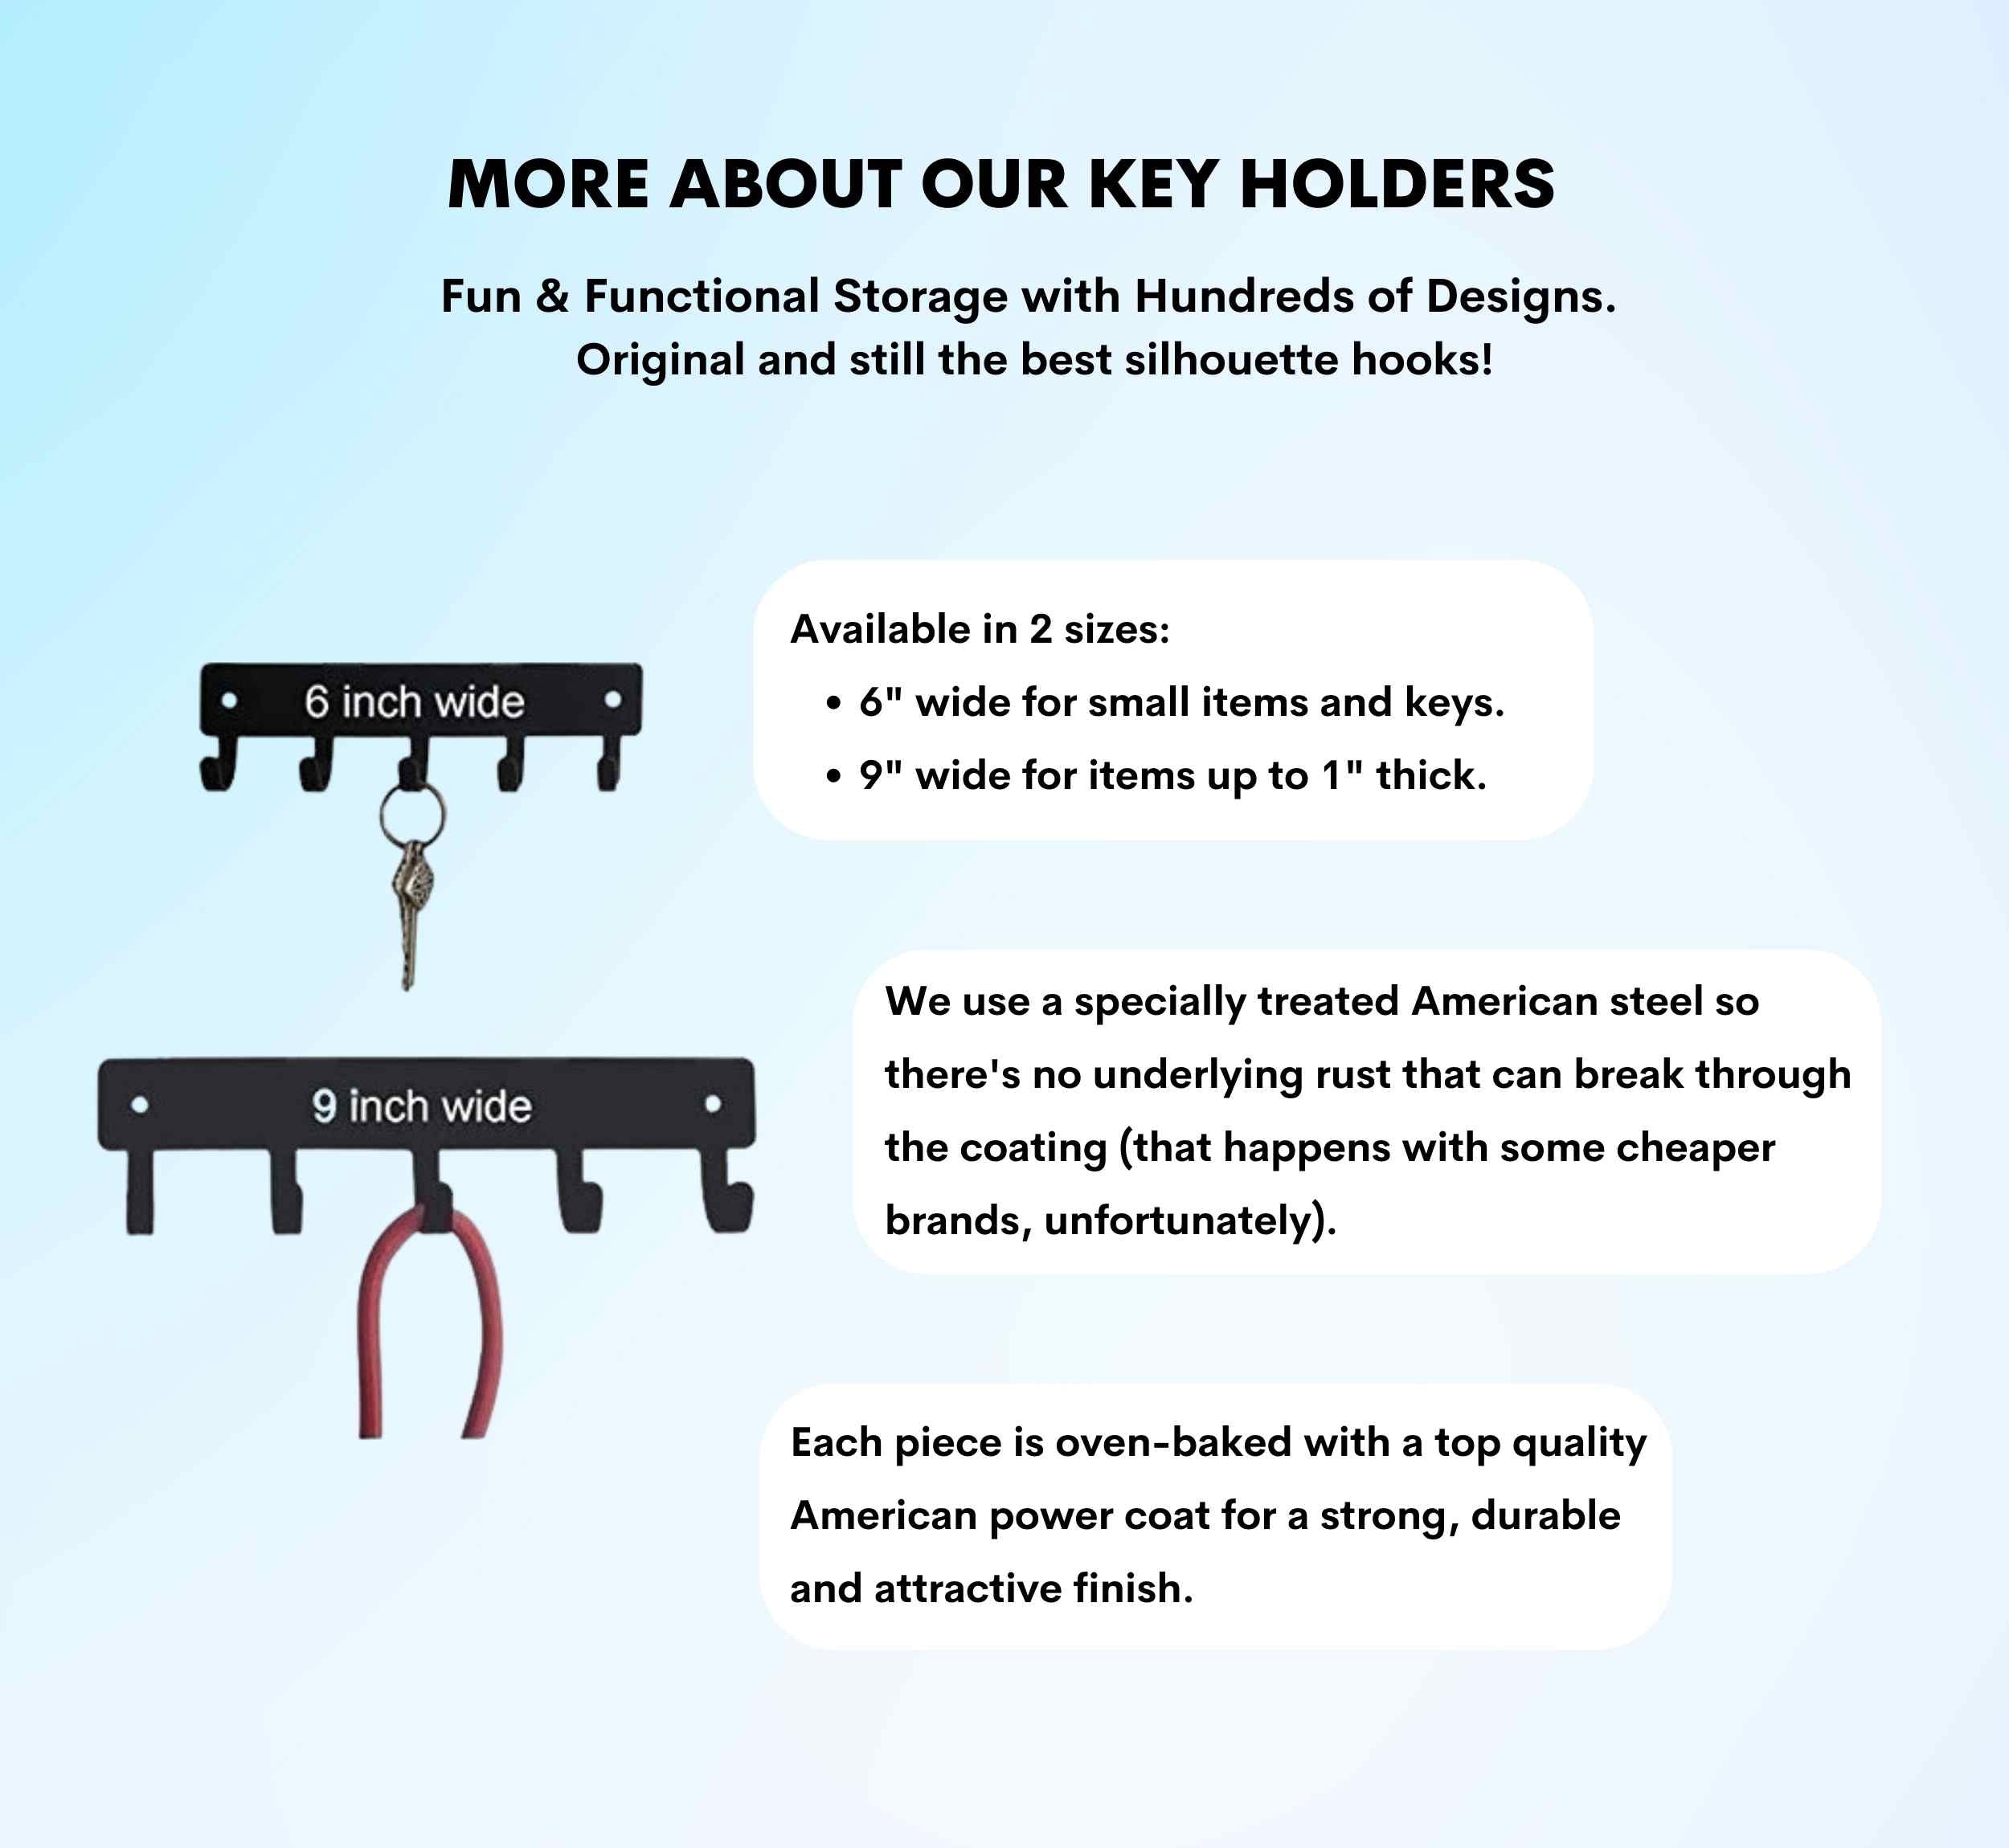 Comparison of 6 inch and 9 inch key holders